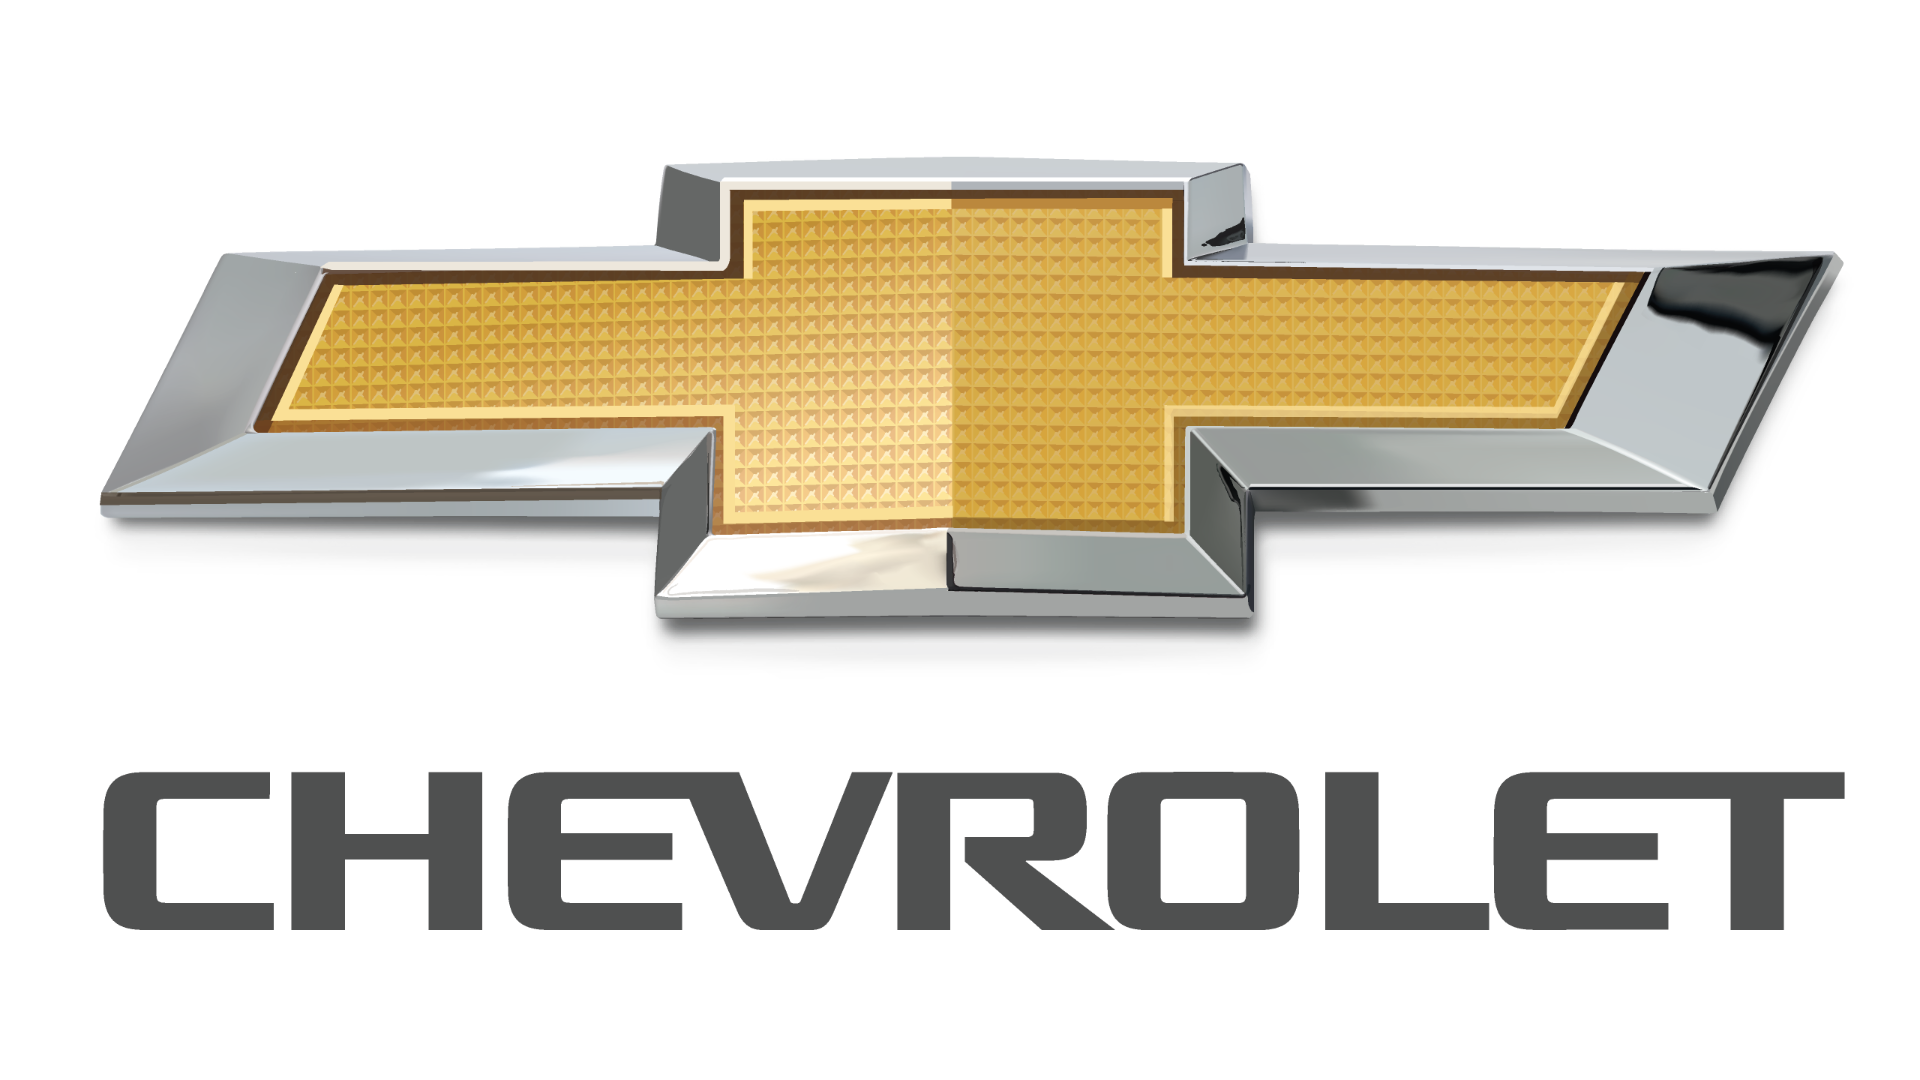 Chevrolet Brand Logo - A Golden Bow tie Shape with the world Chevrolet below.